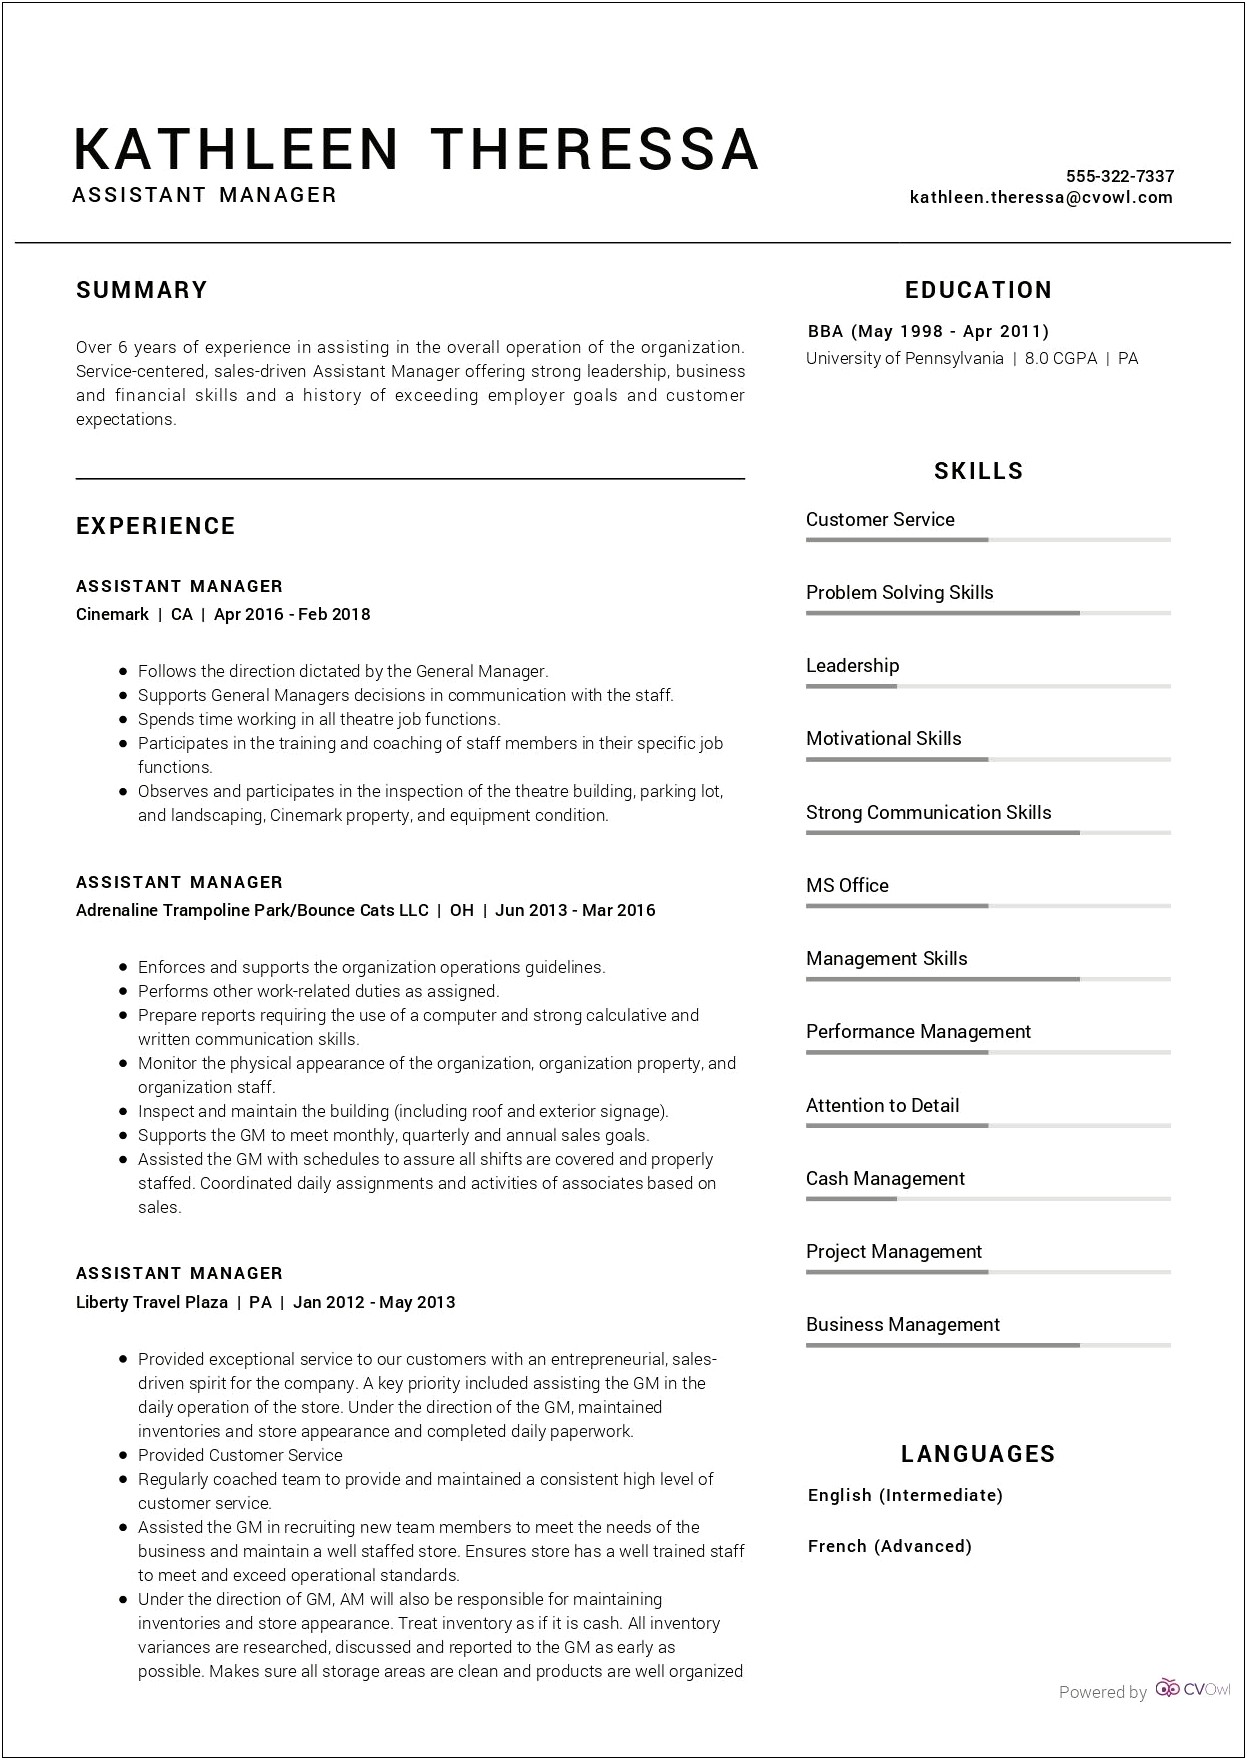 Assistant Manager Summary For Resume